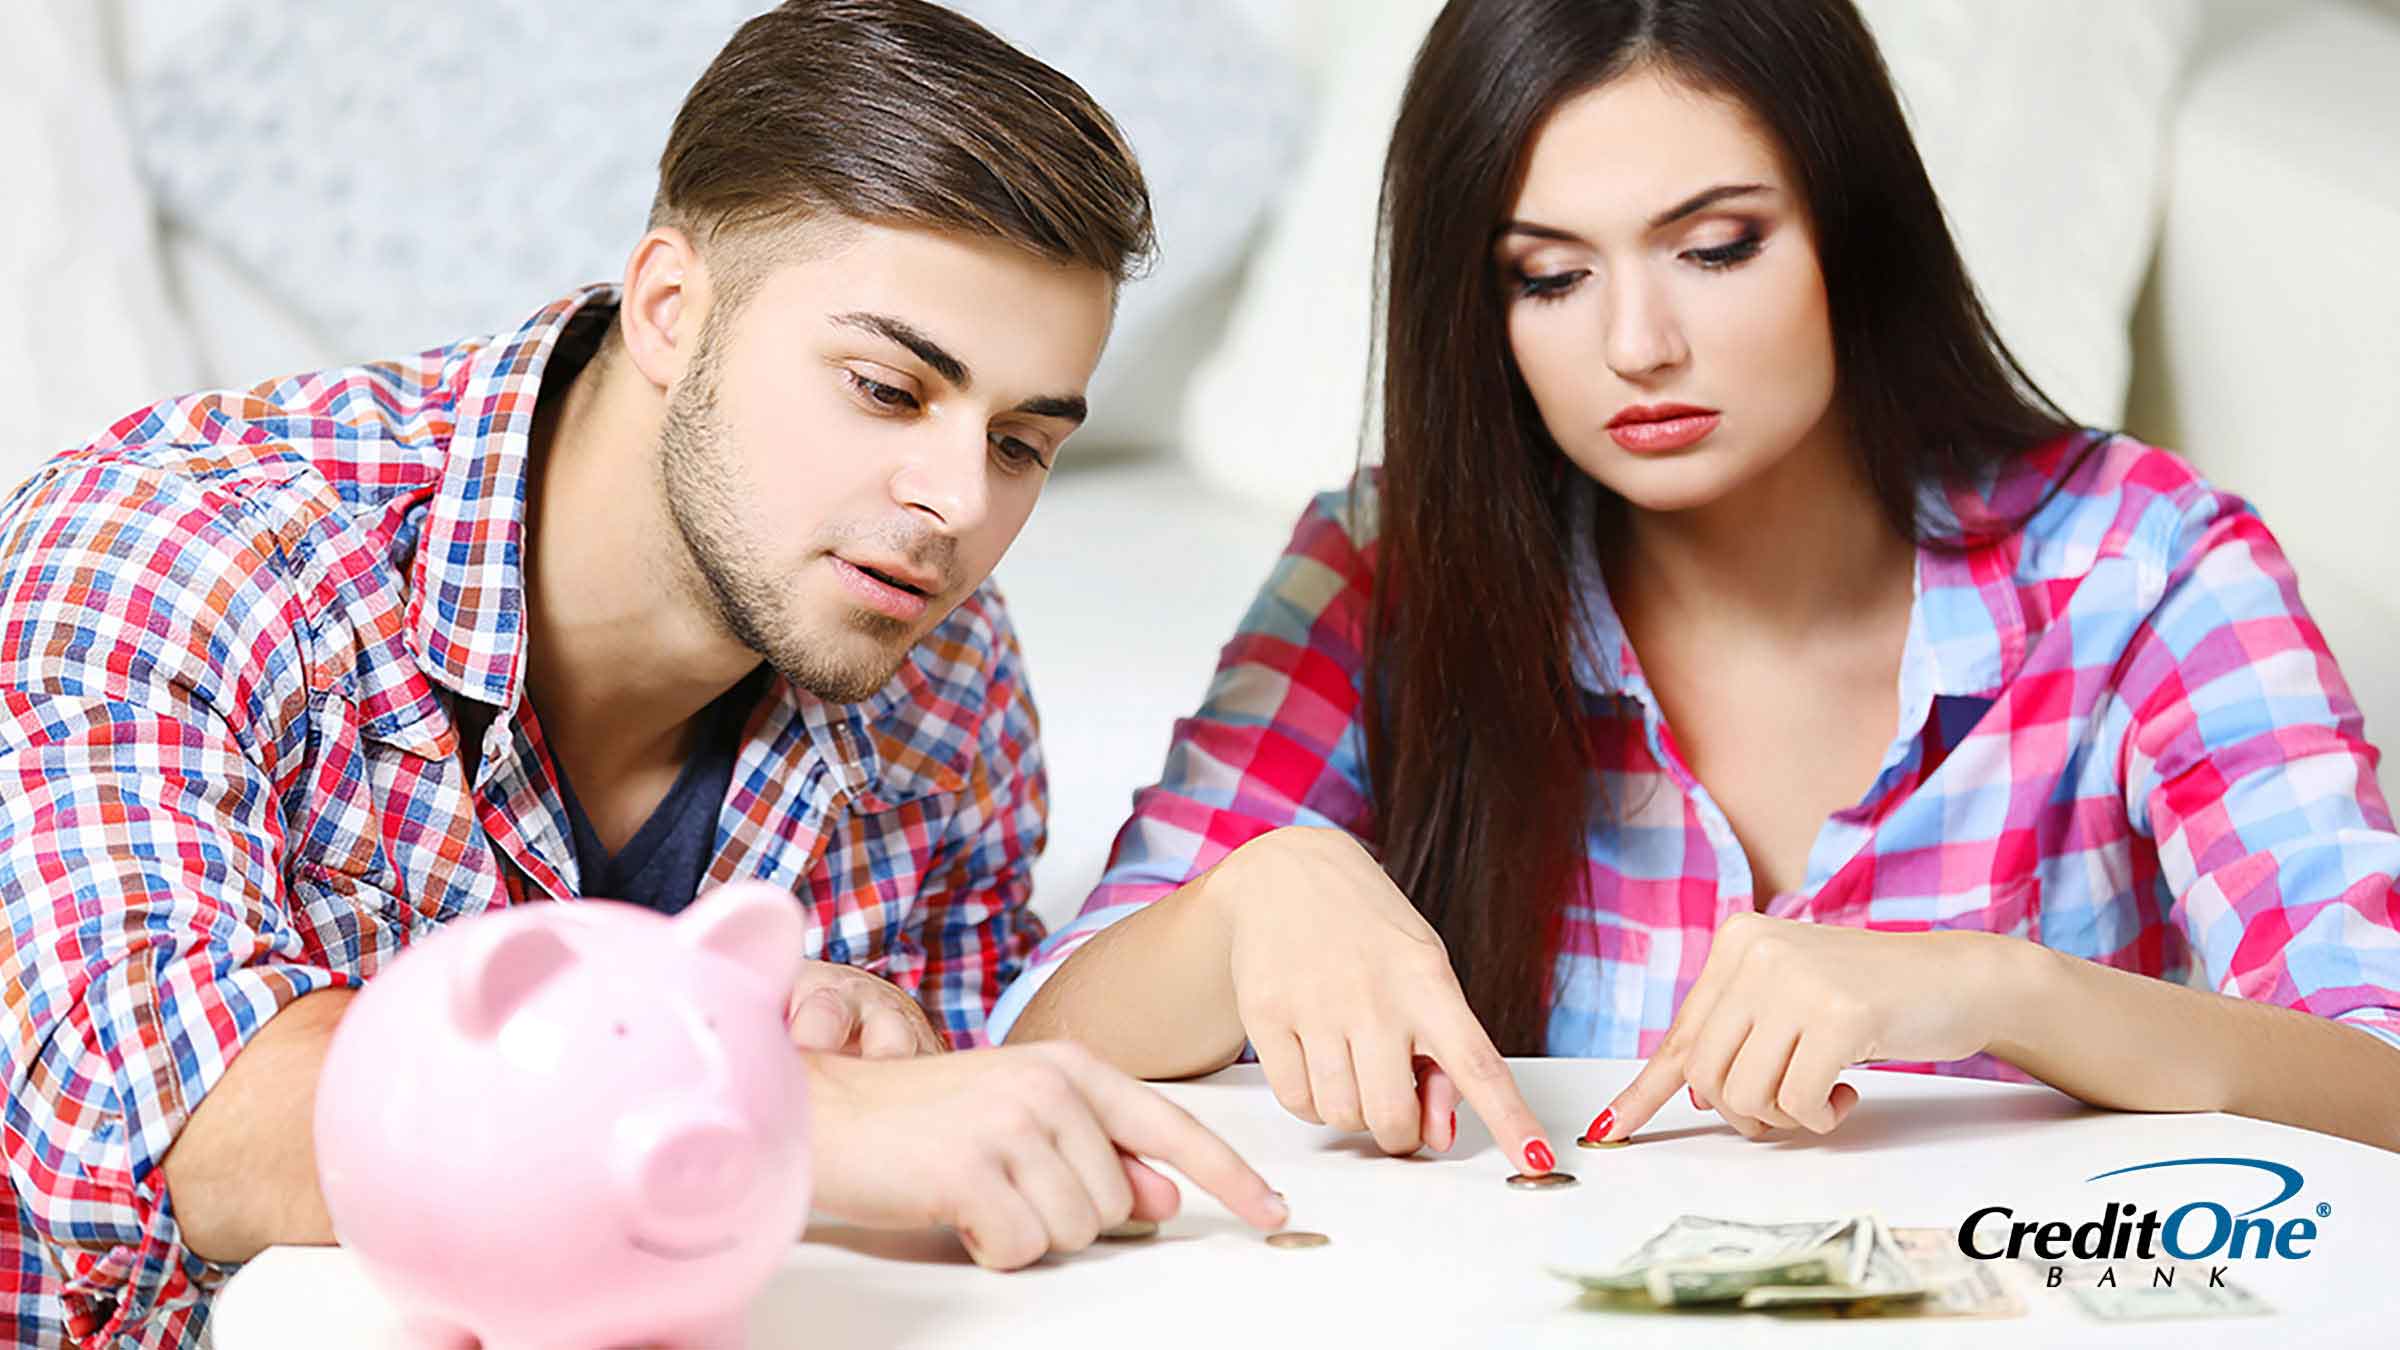 Young man and woman counting up their savings from a pink piggy bank